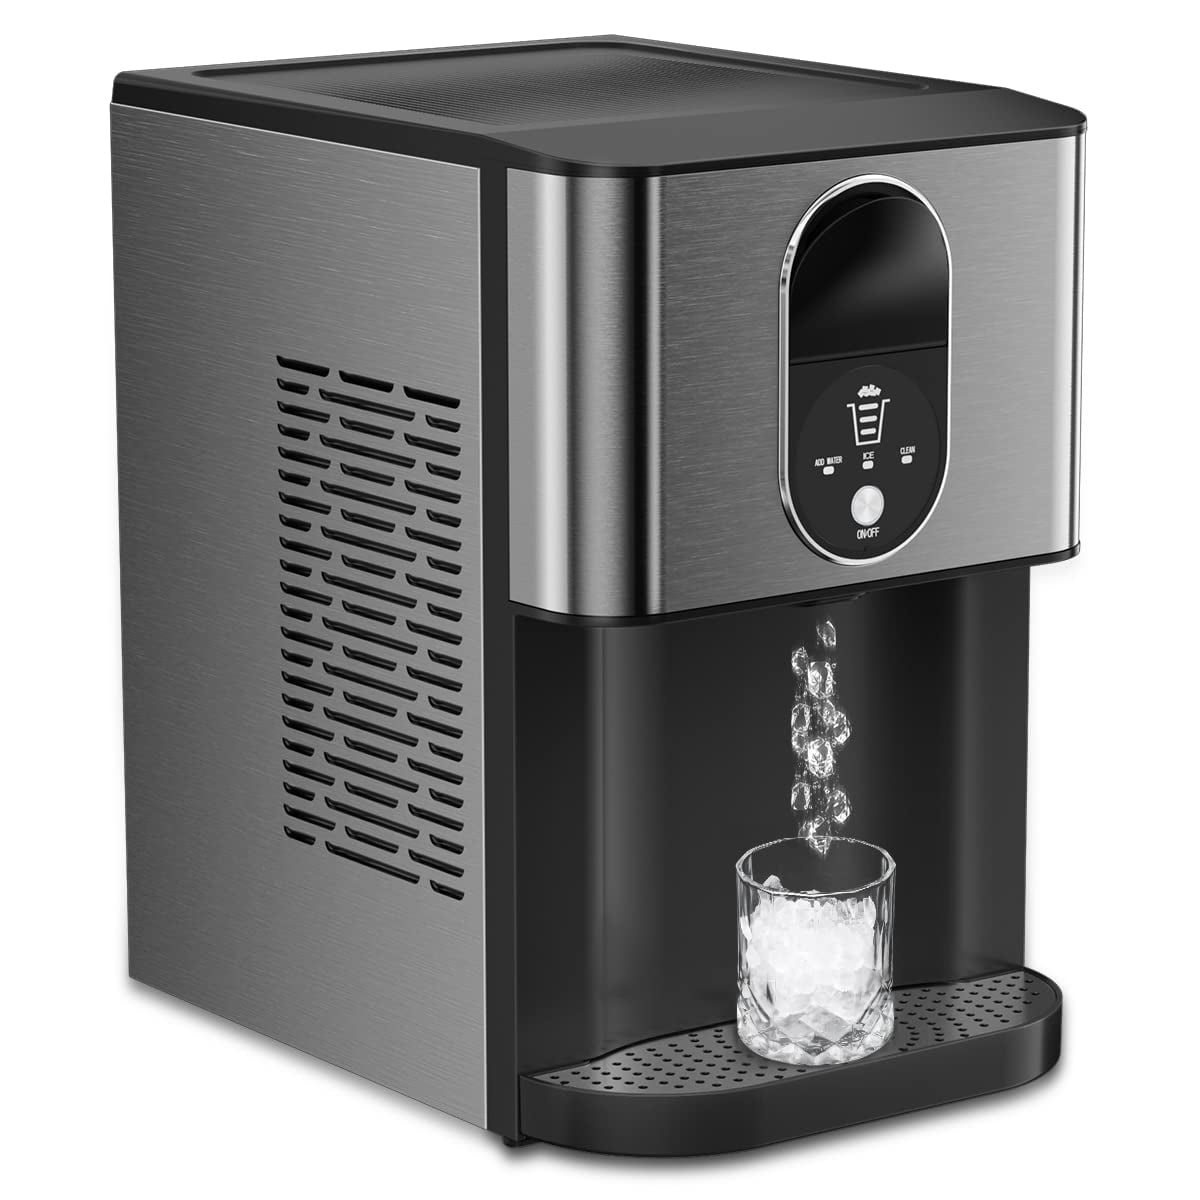 Havato Nugget Ice Maker with Soft Chewable Pellet Ice, Pebble Ice Maker  with Self-Cleaning, Ice Scoop, Basket, Bags, for Home, Office